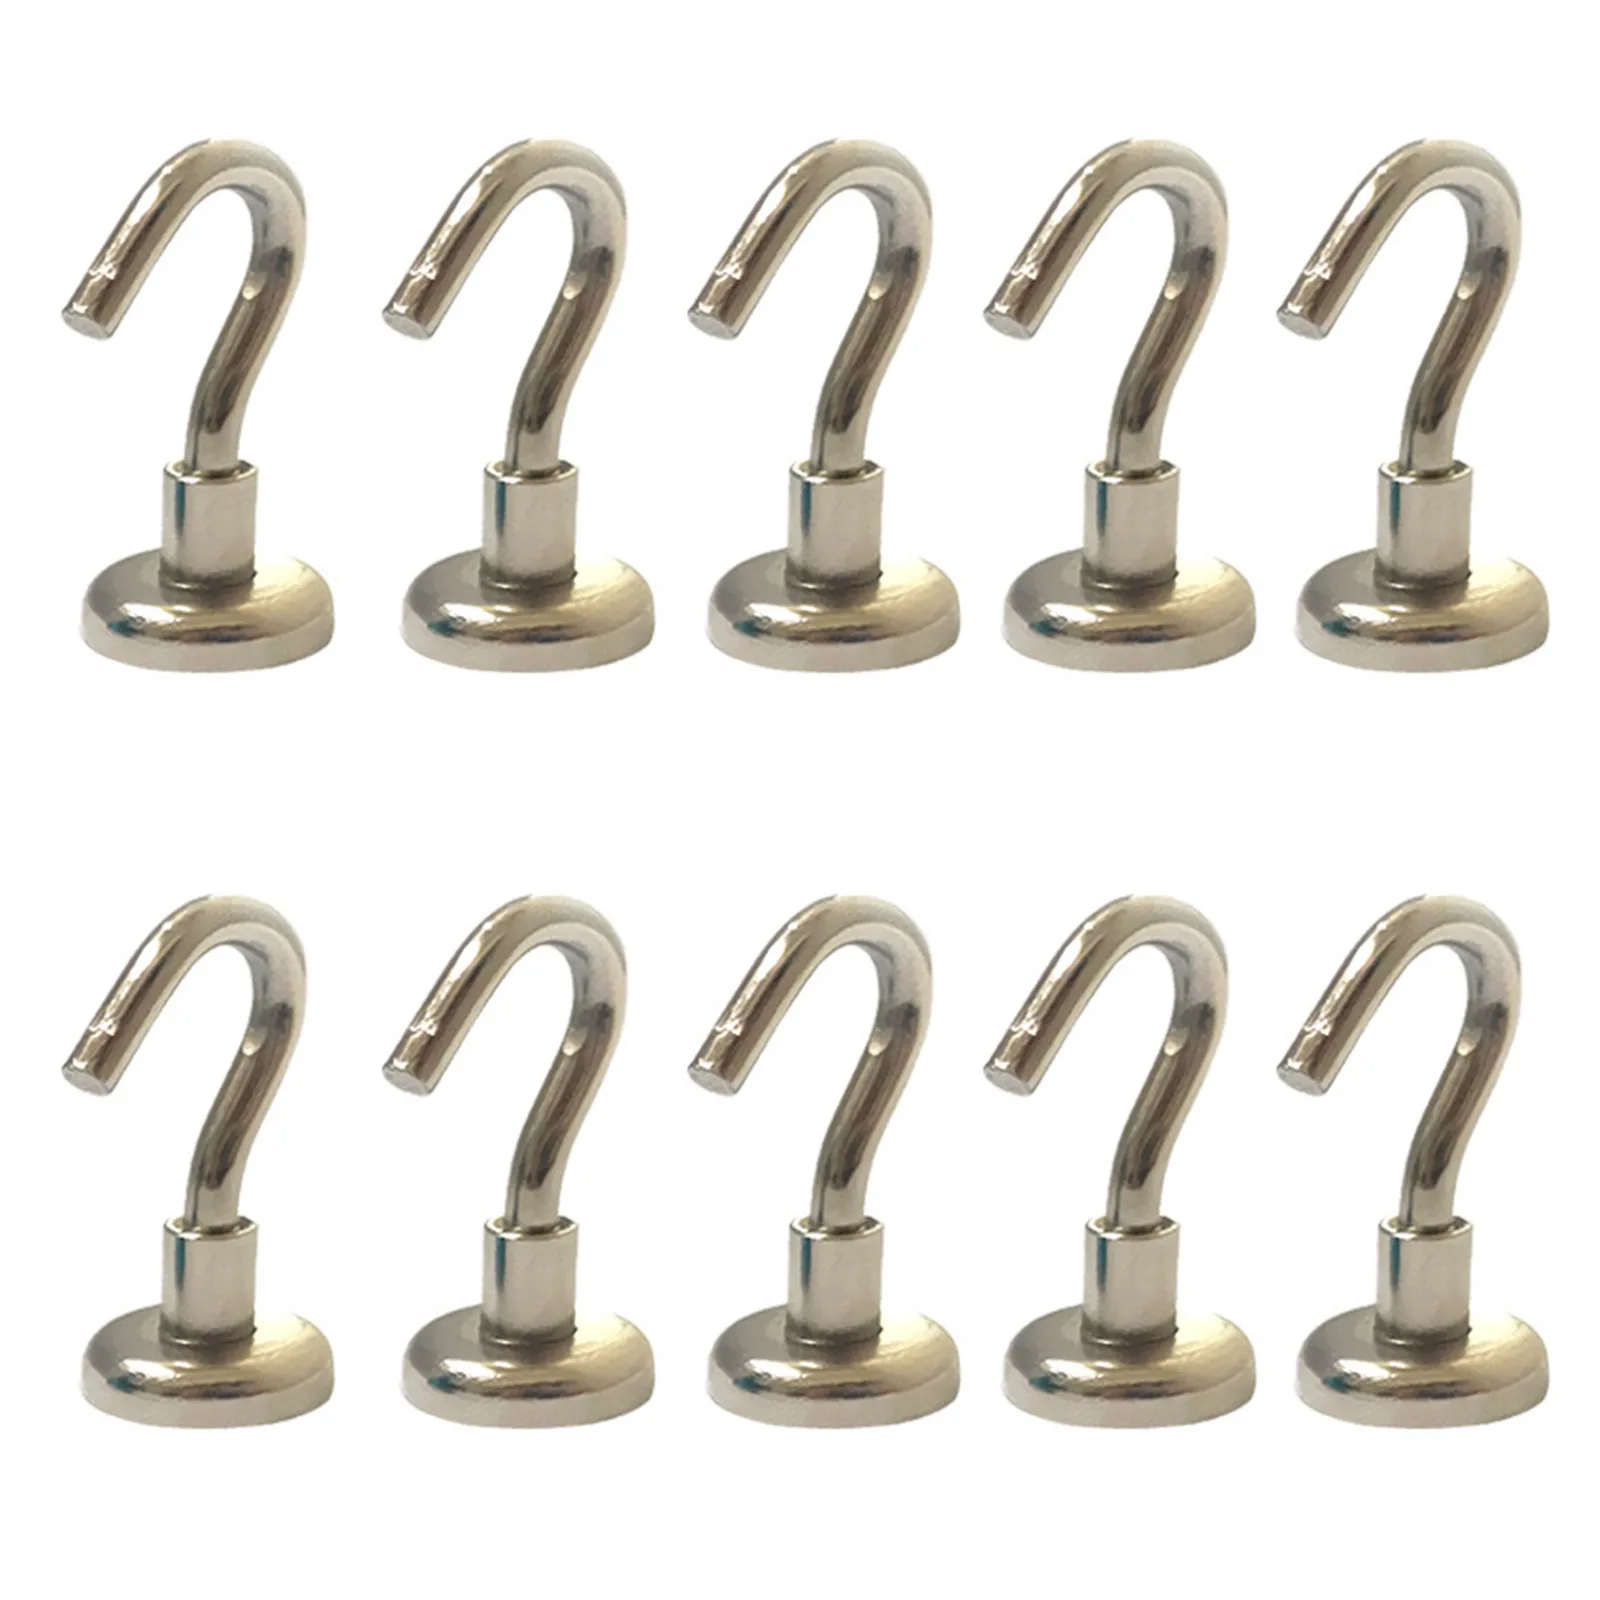 

Heavy Duty Magnetic Hook, Strong Neodymium Magnets Hook for Home, Kitchen, Workplace,etc ,D16mm Hold up to 80Pounds, Pack of 10